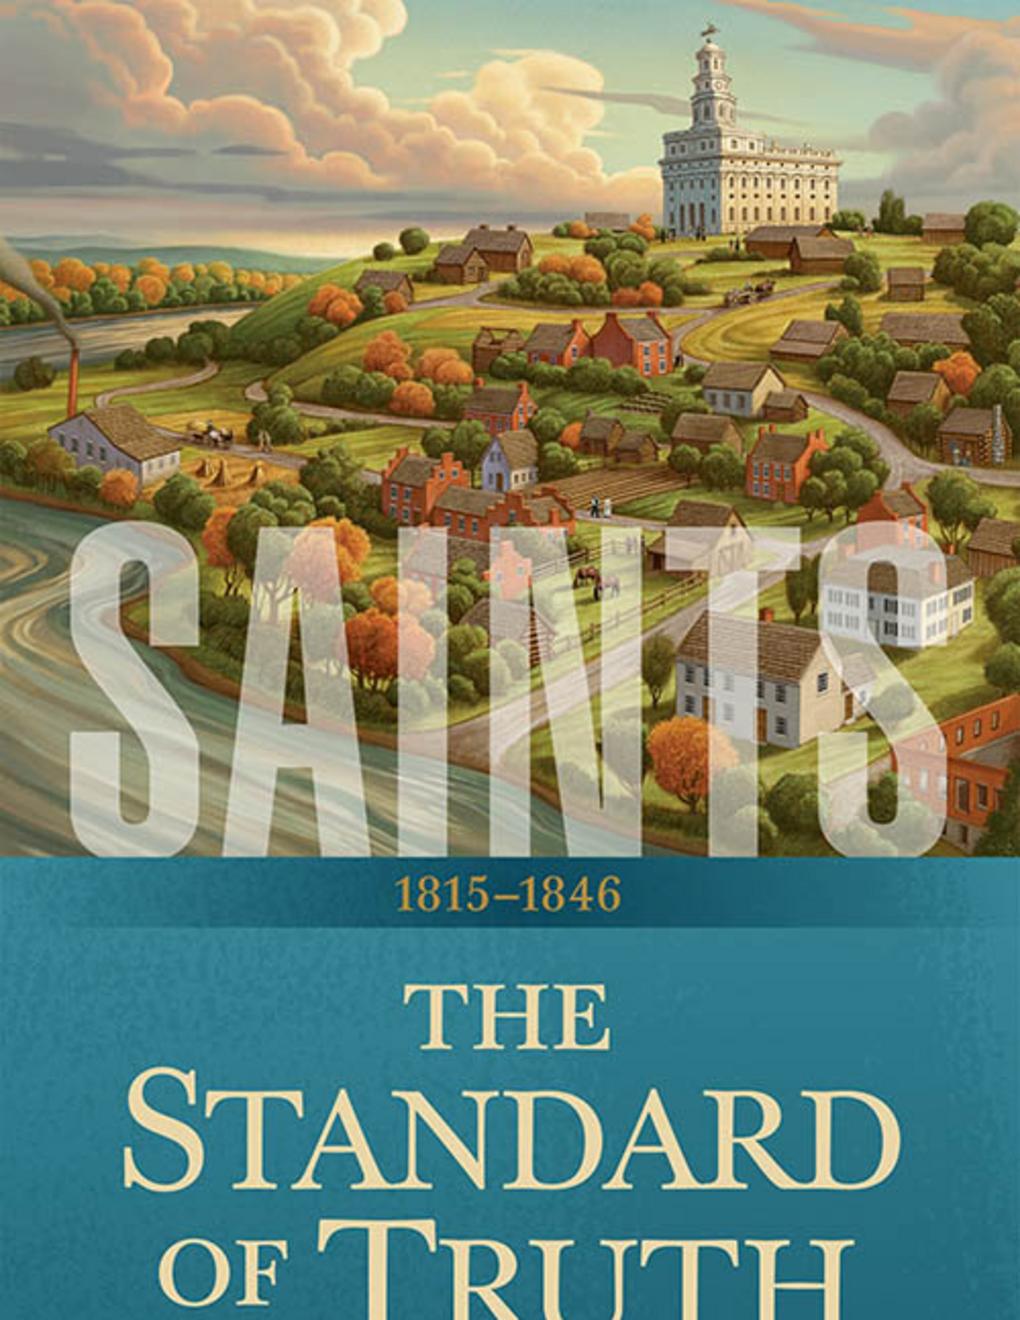 Saints: The Story of the Church of Jesus Christ in the Latter Days, Vol. 1, The Standard of Truth, 1815–1846